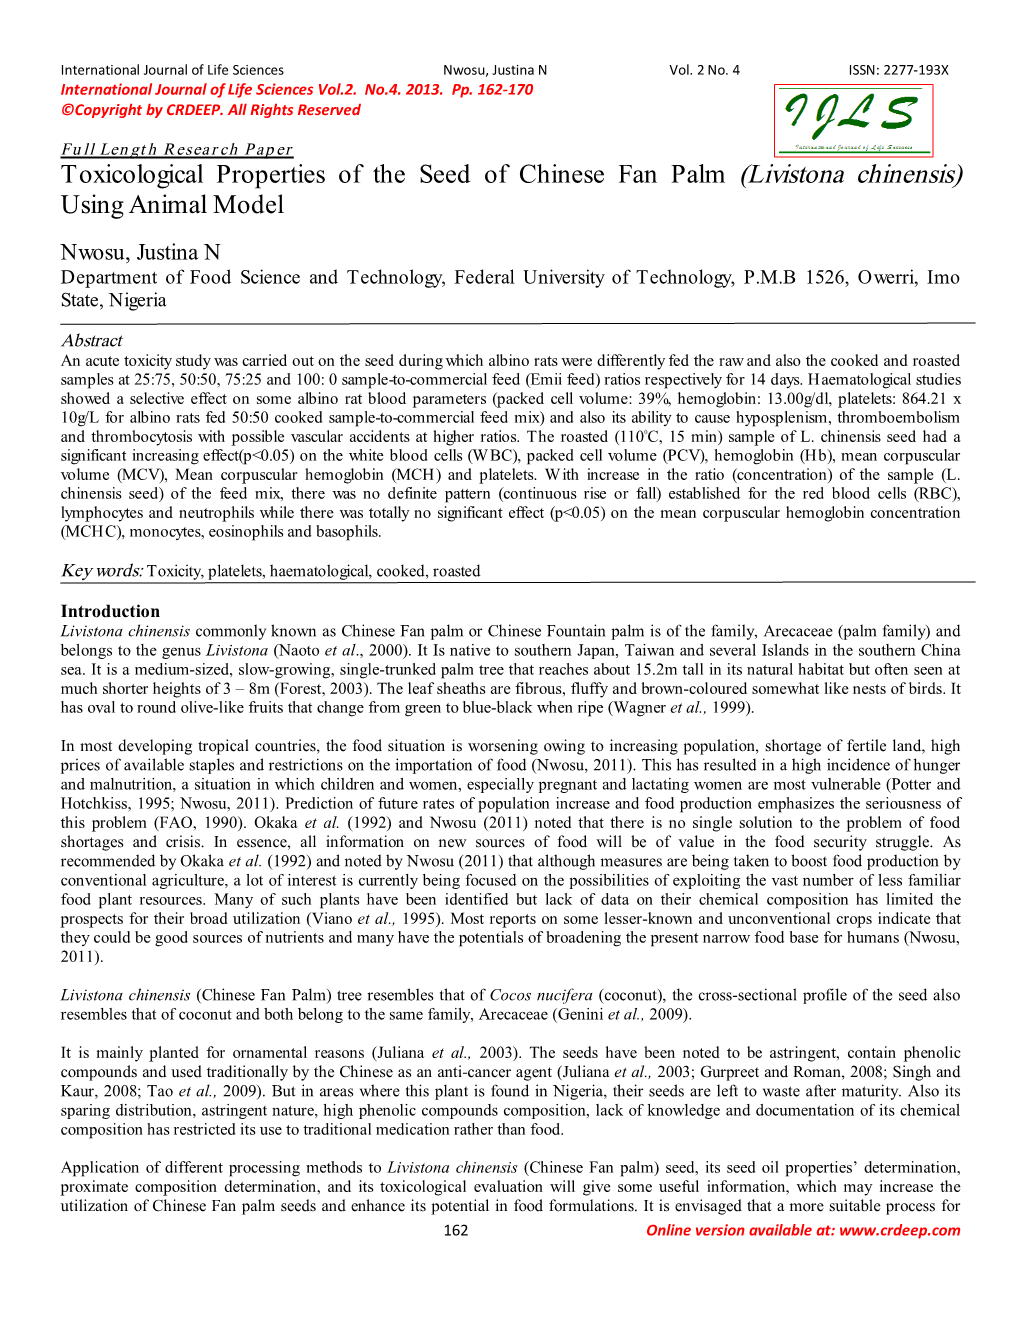 Toxicological Properties of the Seed of Chinese Fan Palm (Livistona Chinensis) Using Animal Model